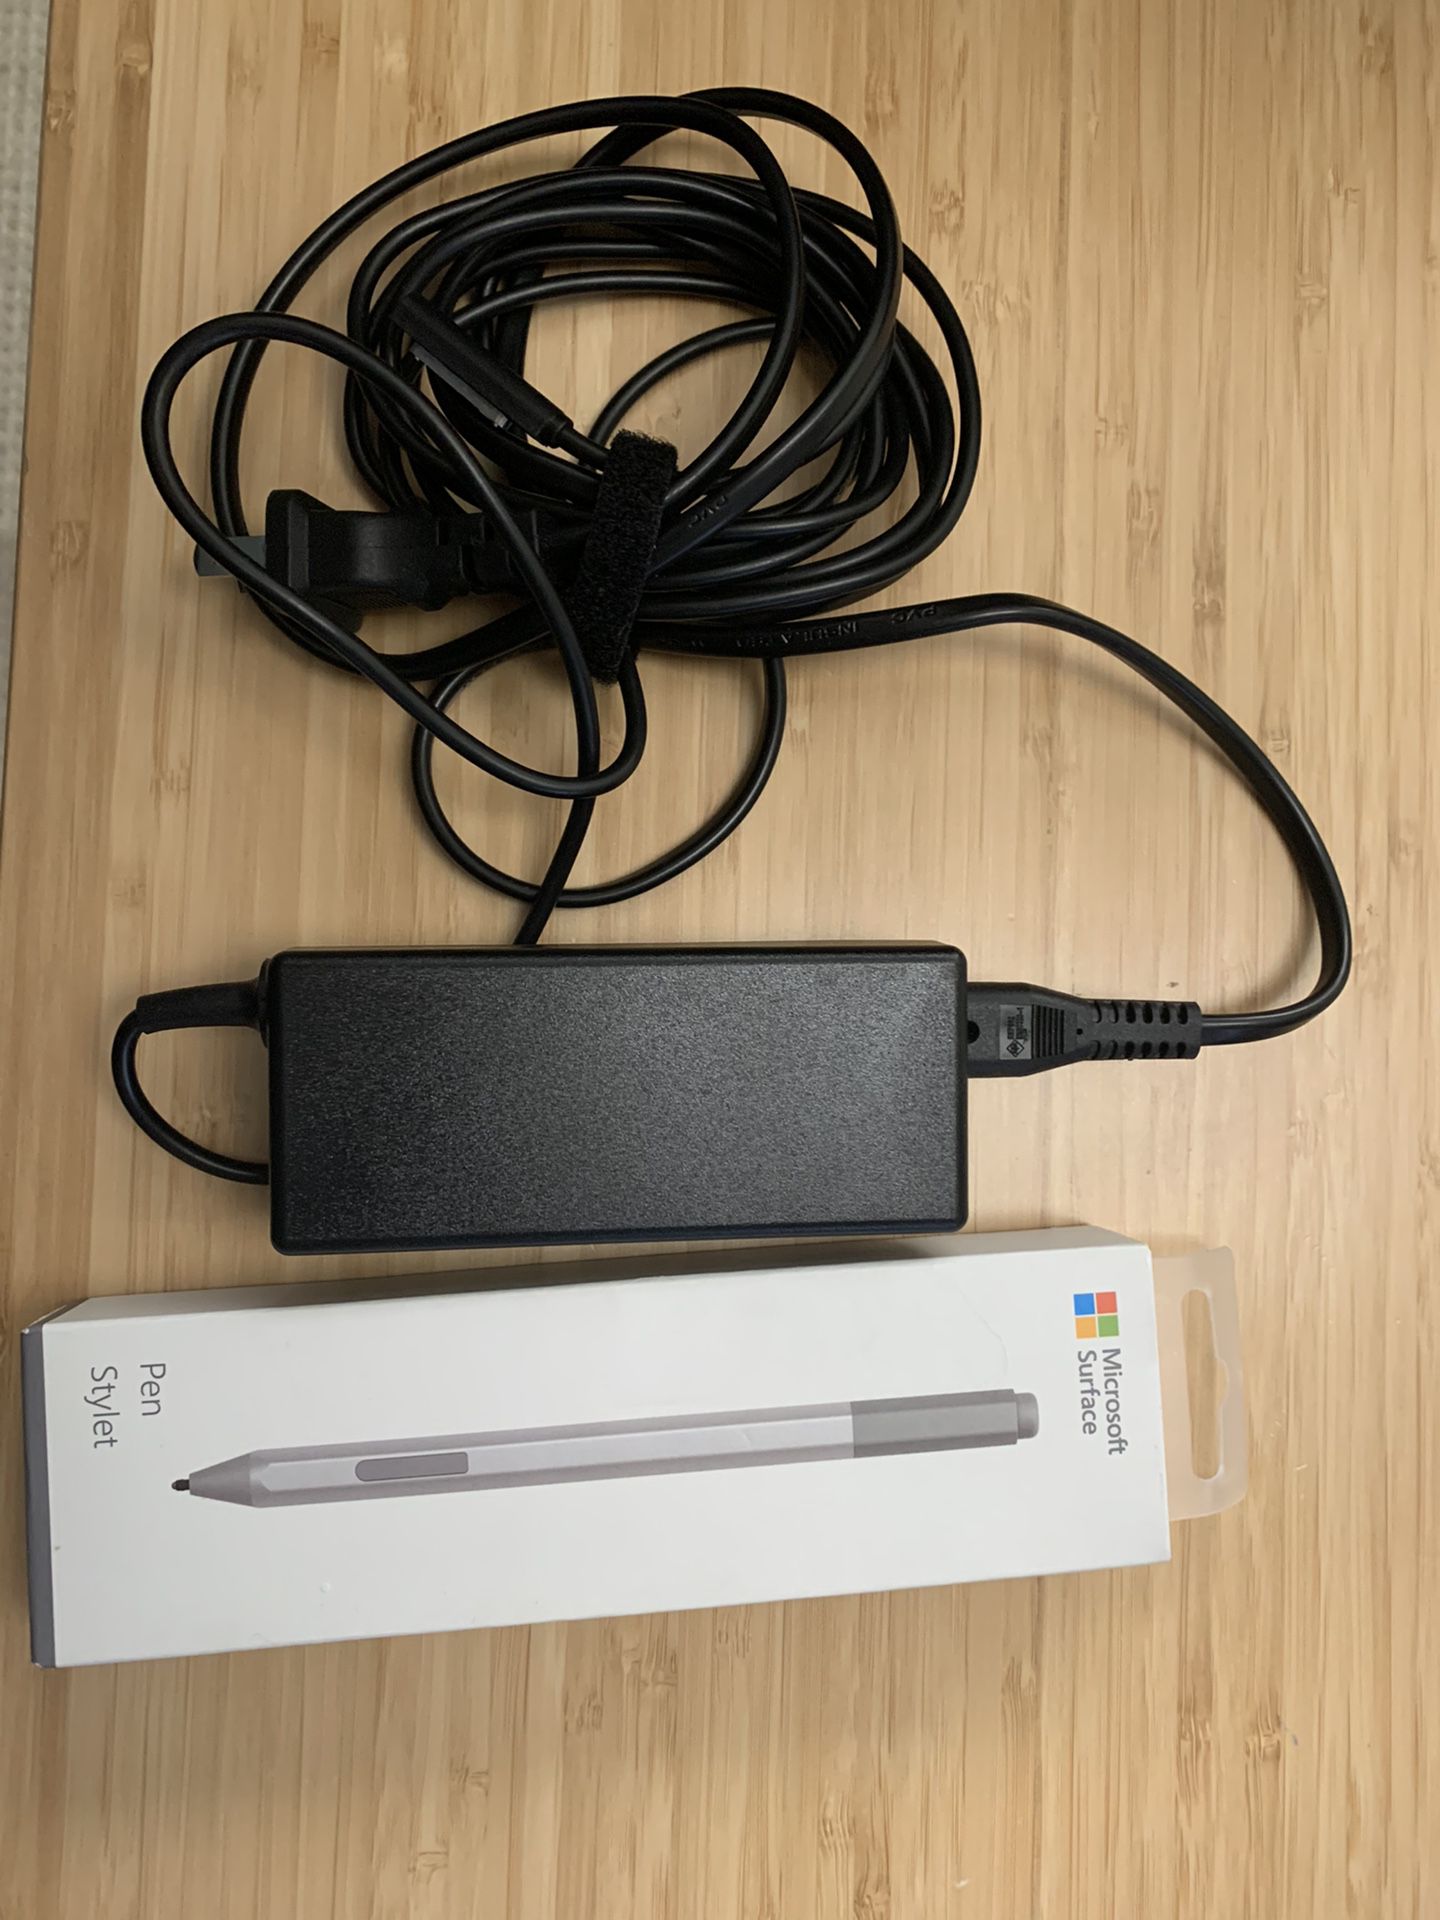 Microsoft surface Pen stylus And Charger